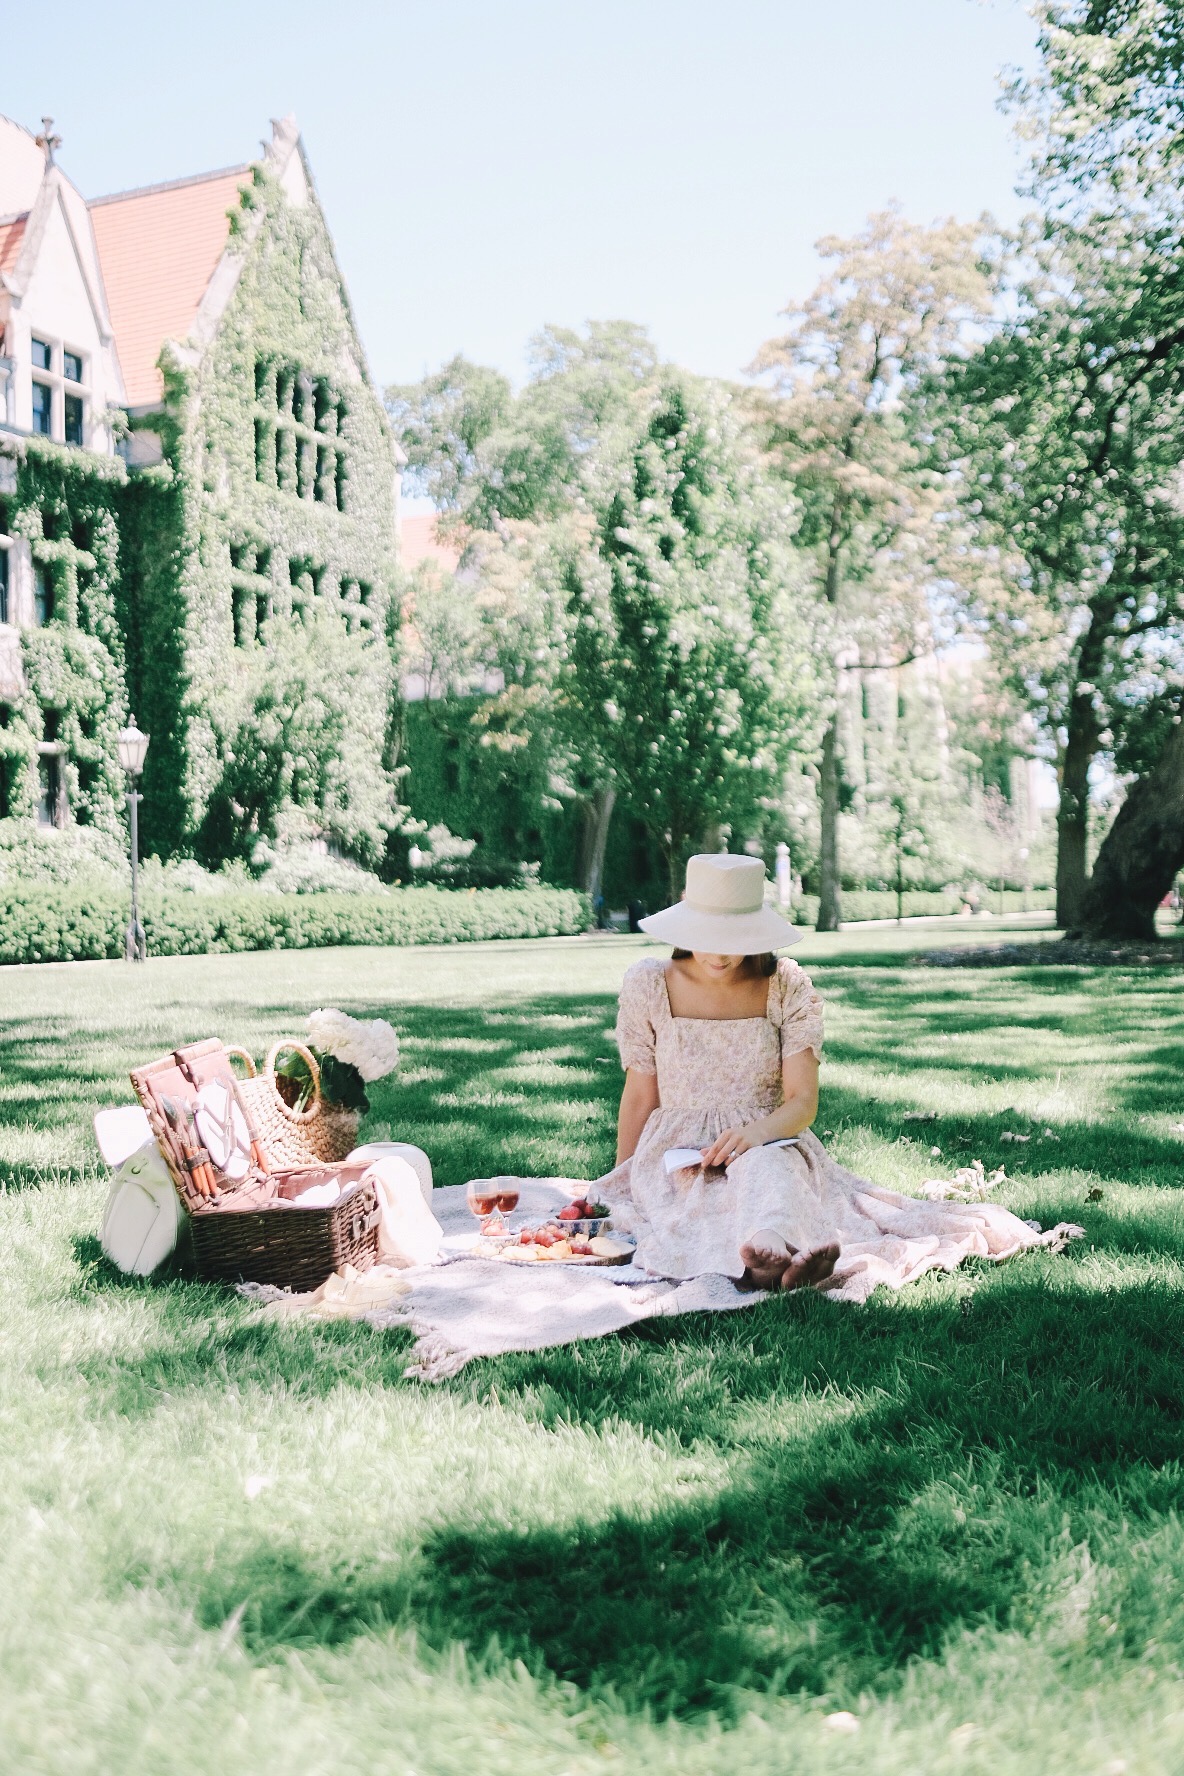 Picnic in the park | Miss Madeline Rose